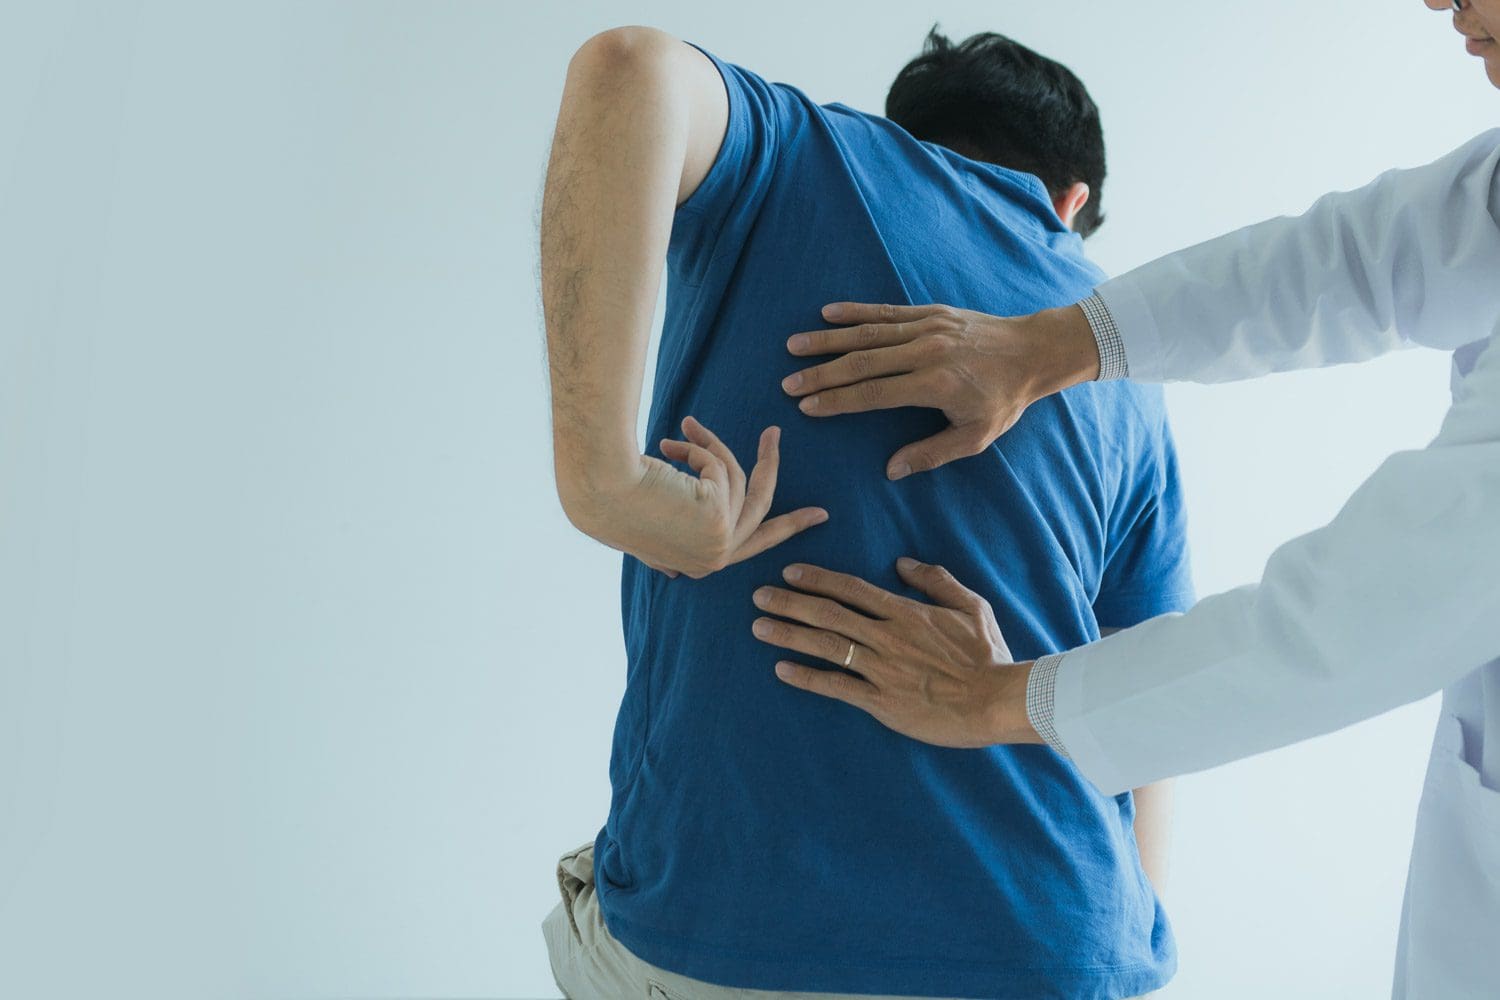 A chiropractor in Tigard examines a man's back to provide treatment for back pain relief.